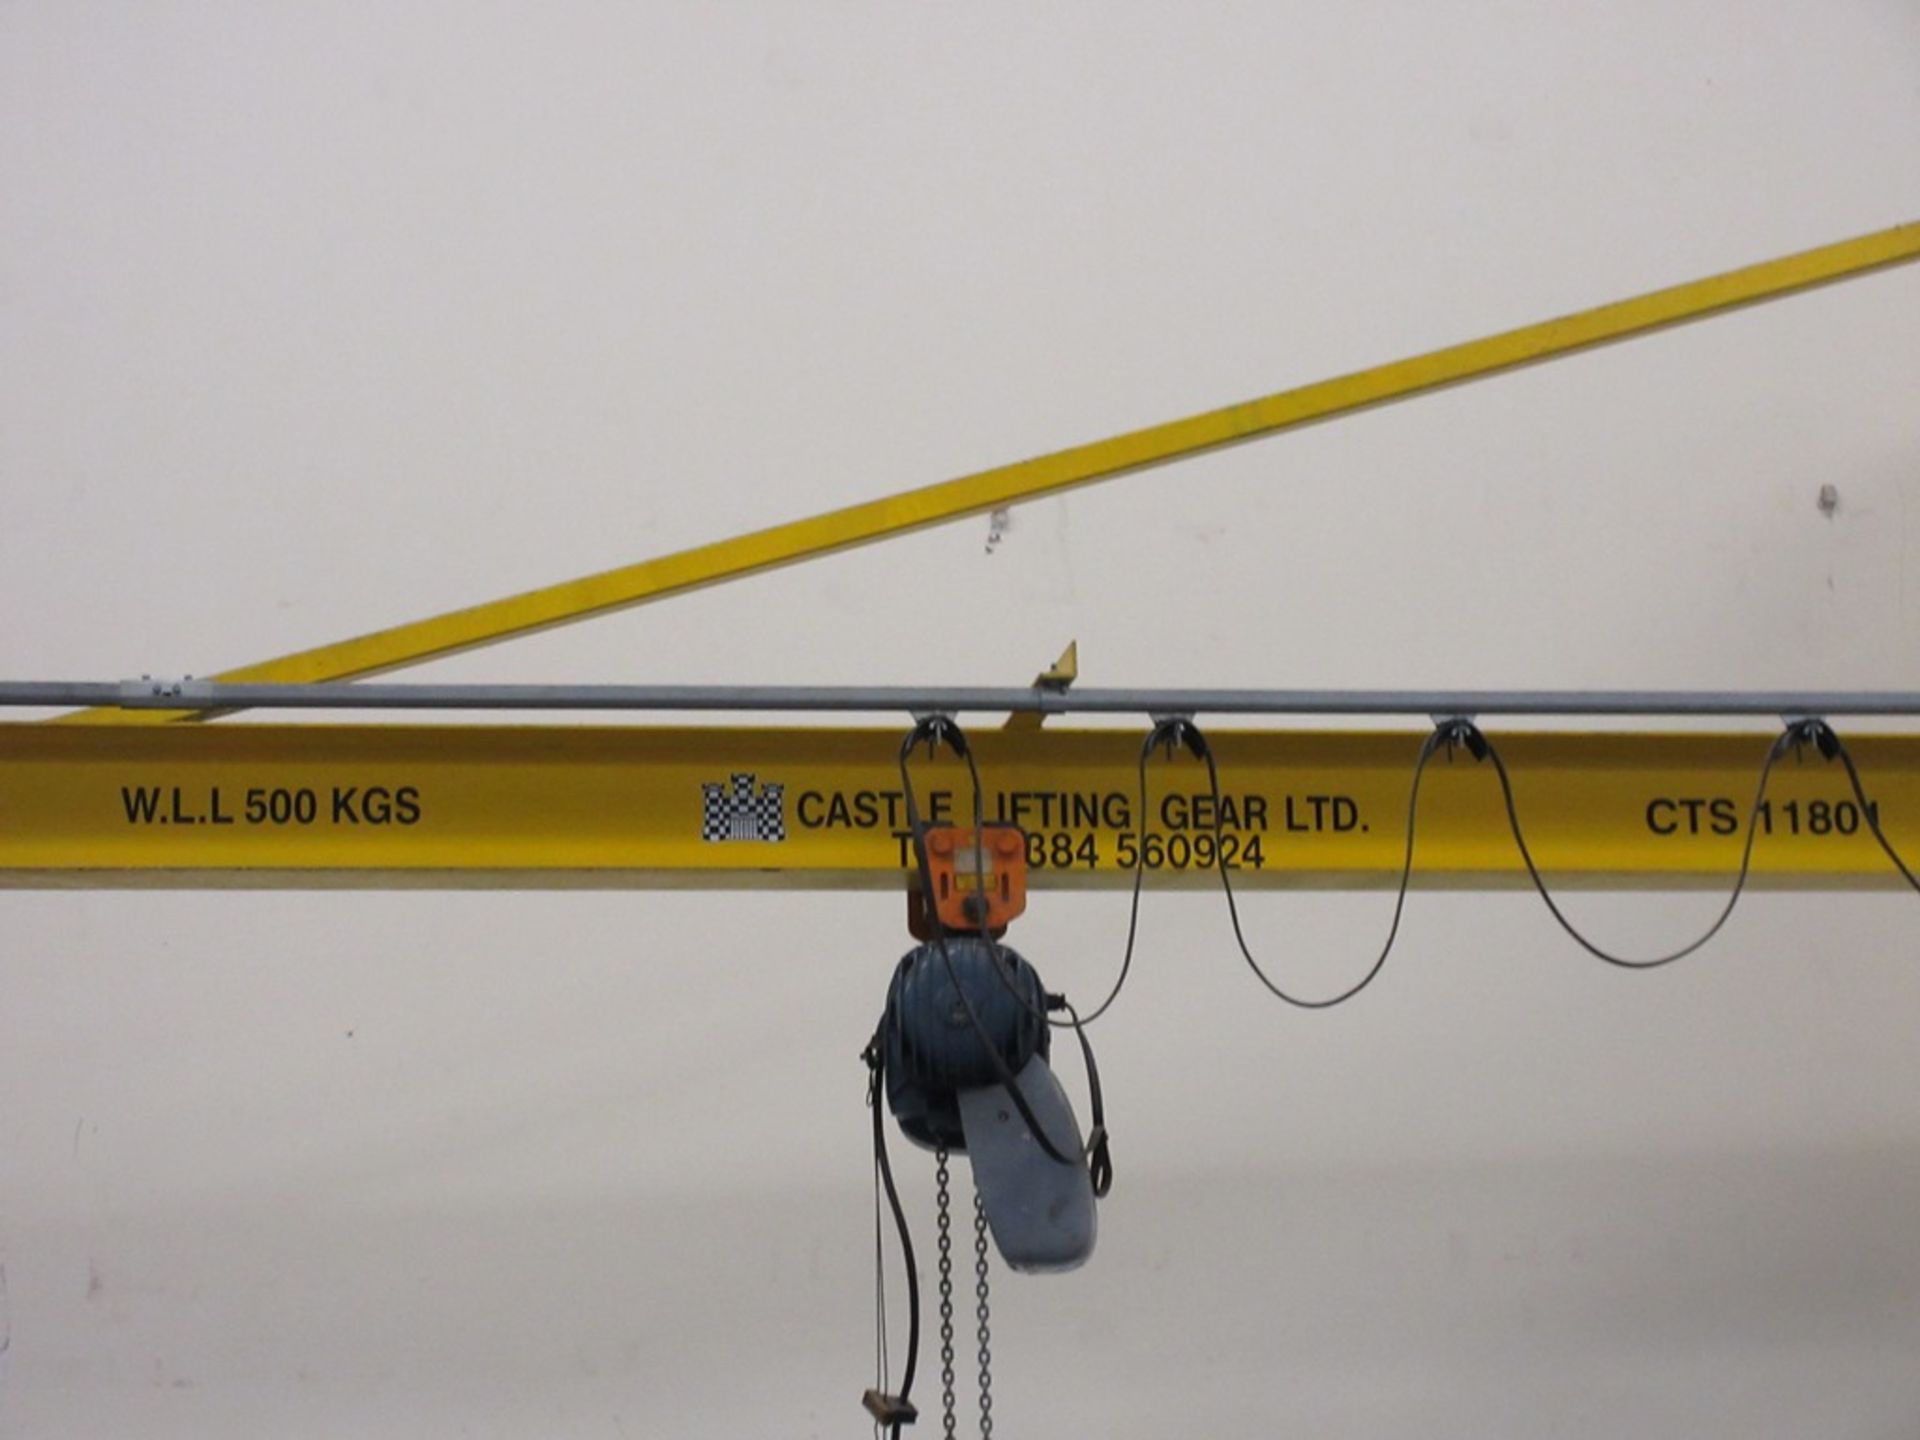 Castle Lifting Gear pillar jib crane, approx. span 4m, ref: CTS 11801 with Demag electric chain - Image 3 of 4